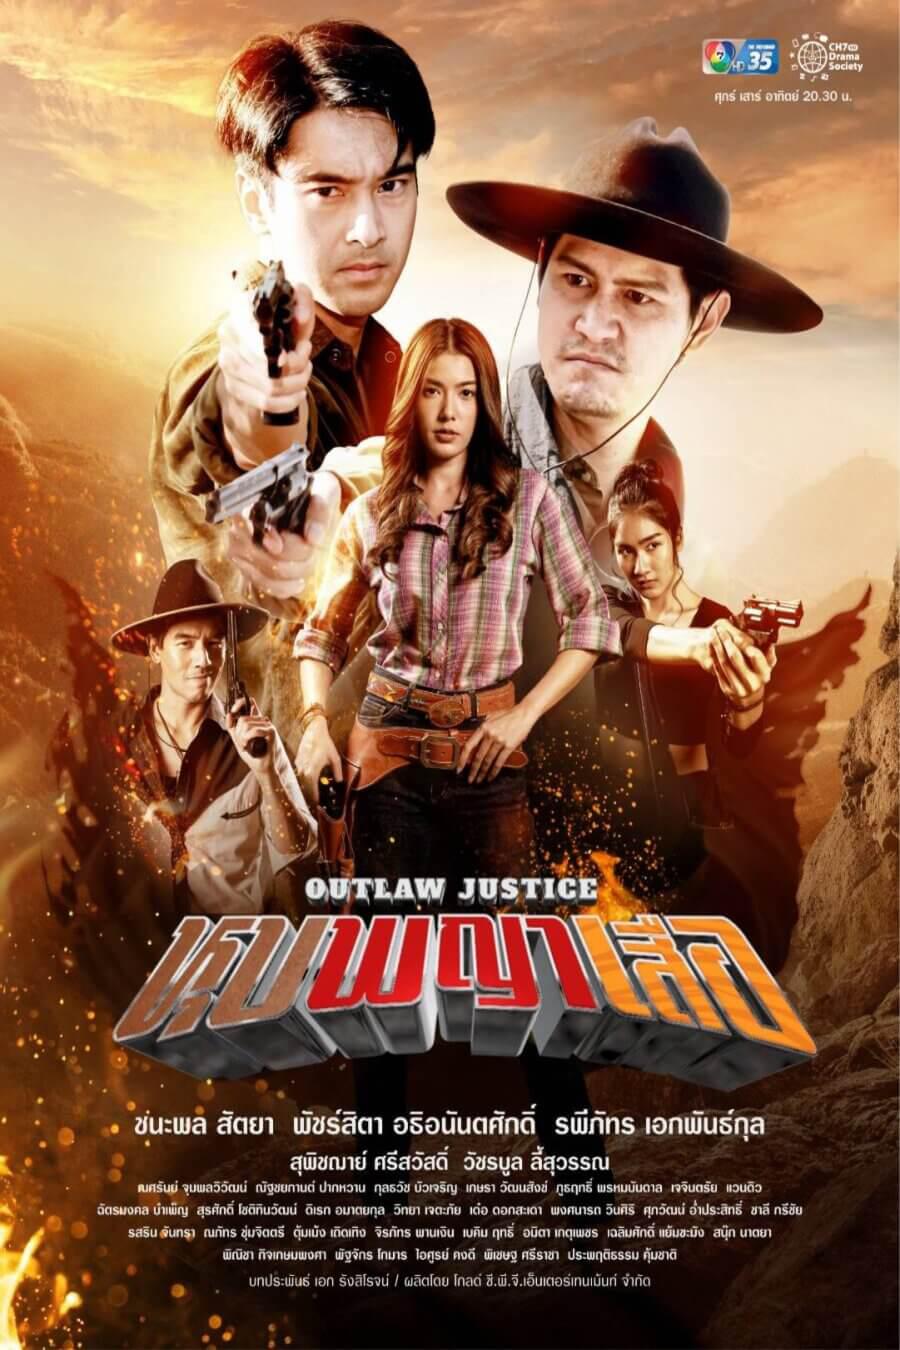 TV ratings for Outlaw Justice (หุบพญาเสือ) in Colombia. Channel 7 TV series